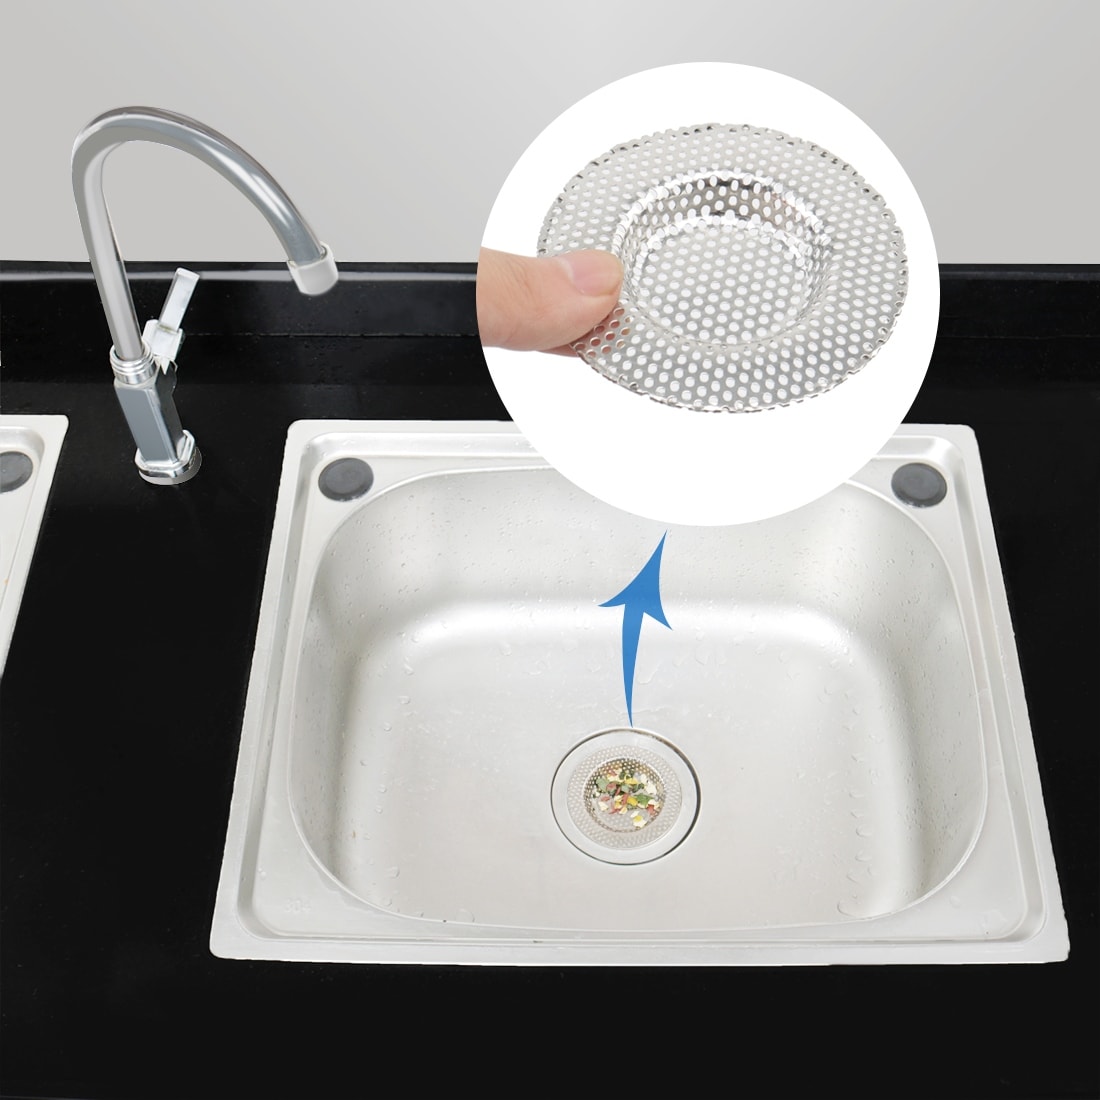 How To Install A Kitchen Sink Drain Basket